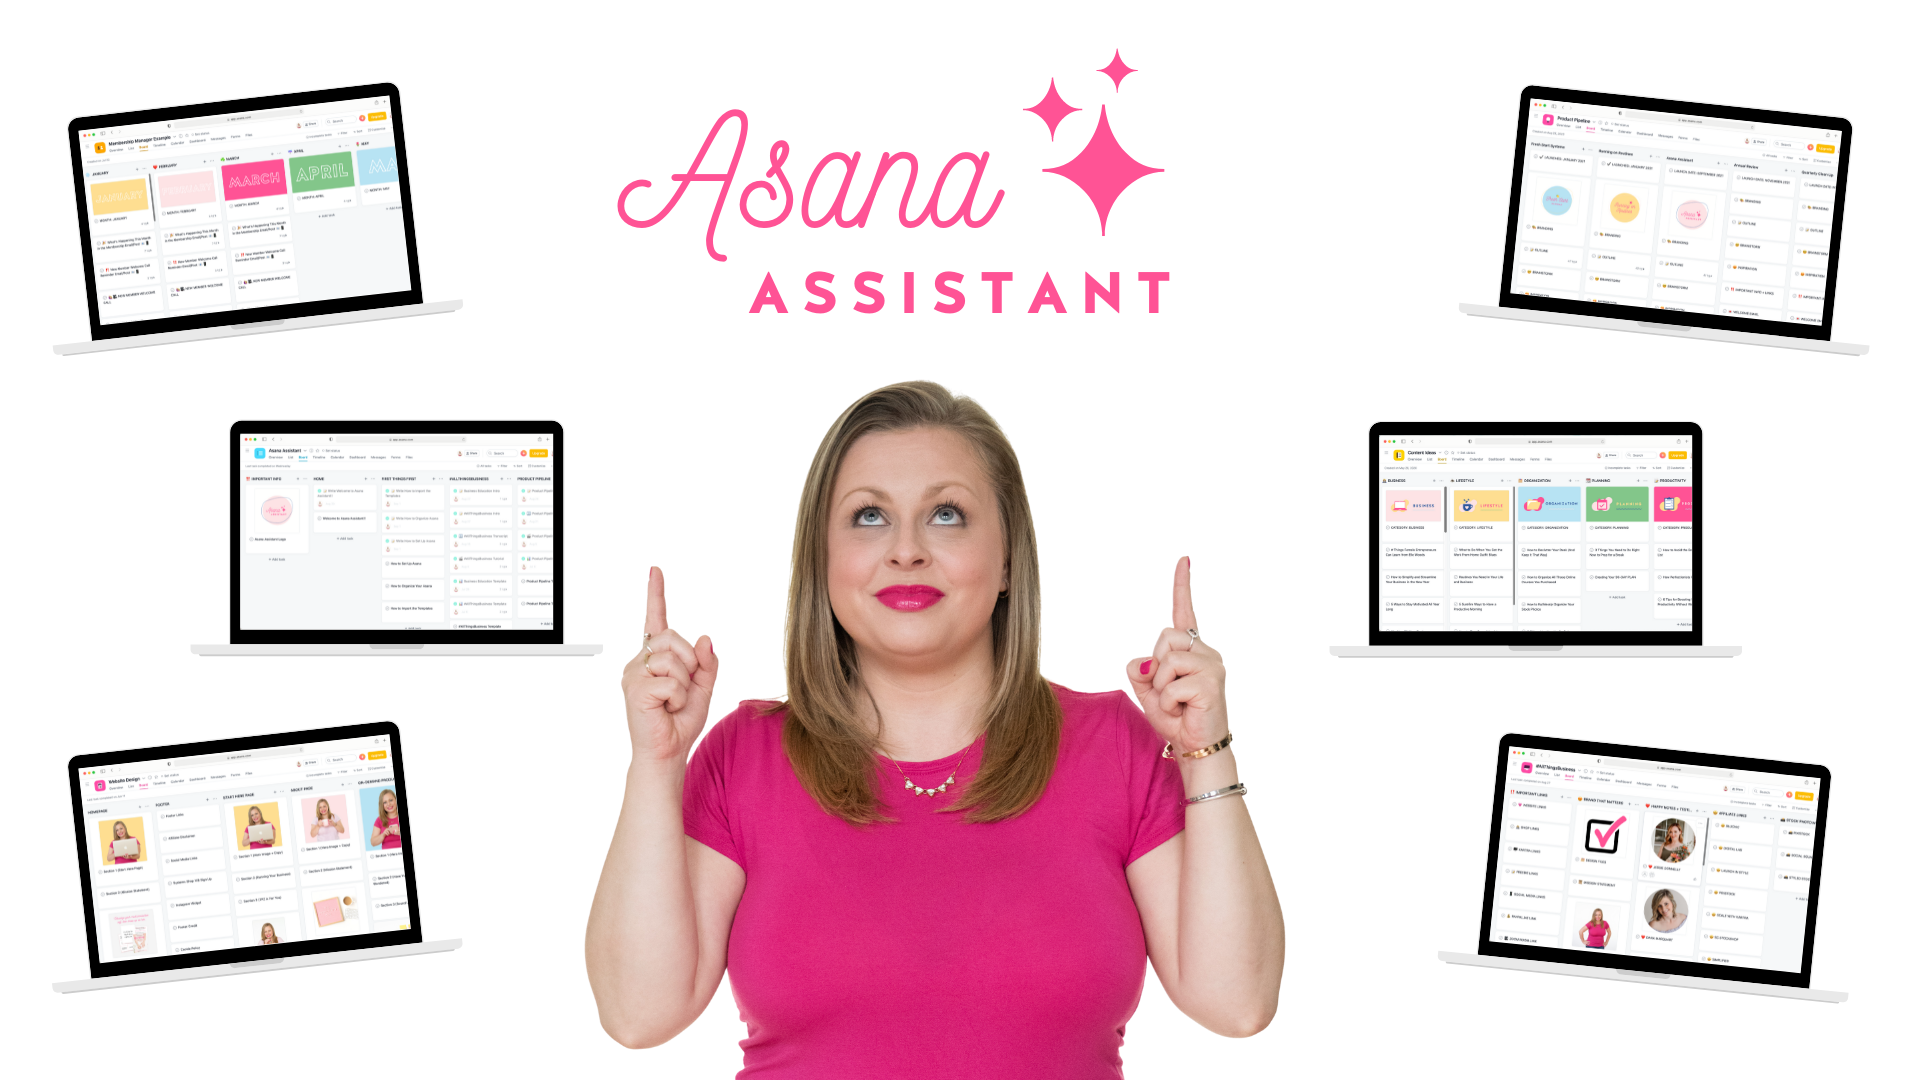 Alexandra of The Productivity Zone in a hot pink t-shirt pointing up at the Asana Assistant logo surrounded by laptop mockups featuring her Asana Assistant templates